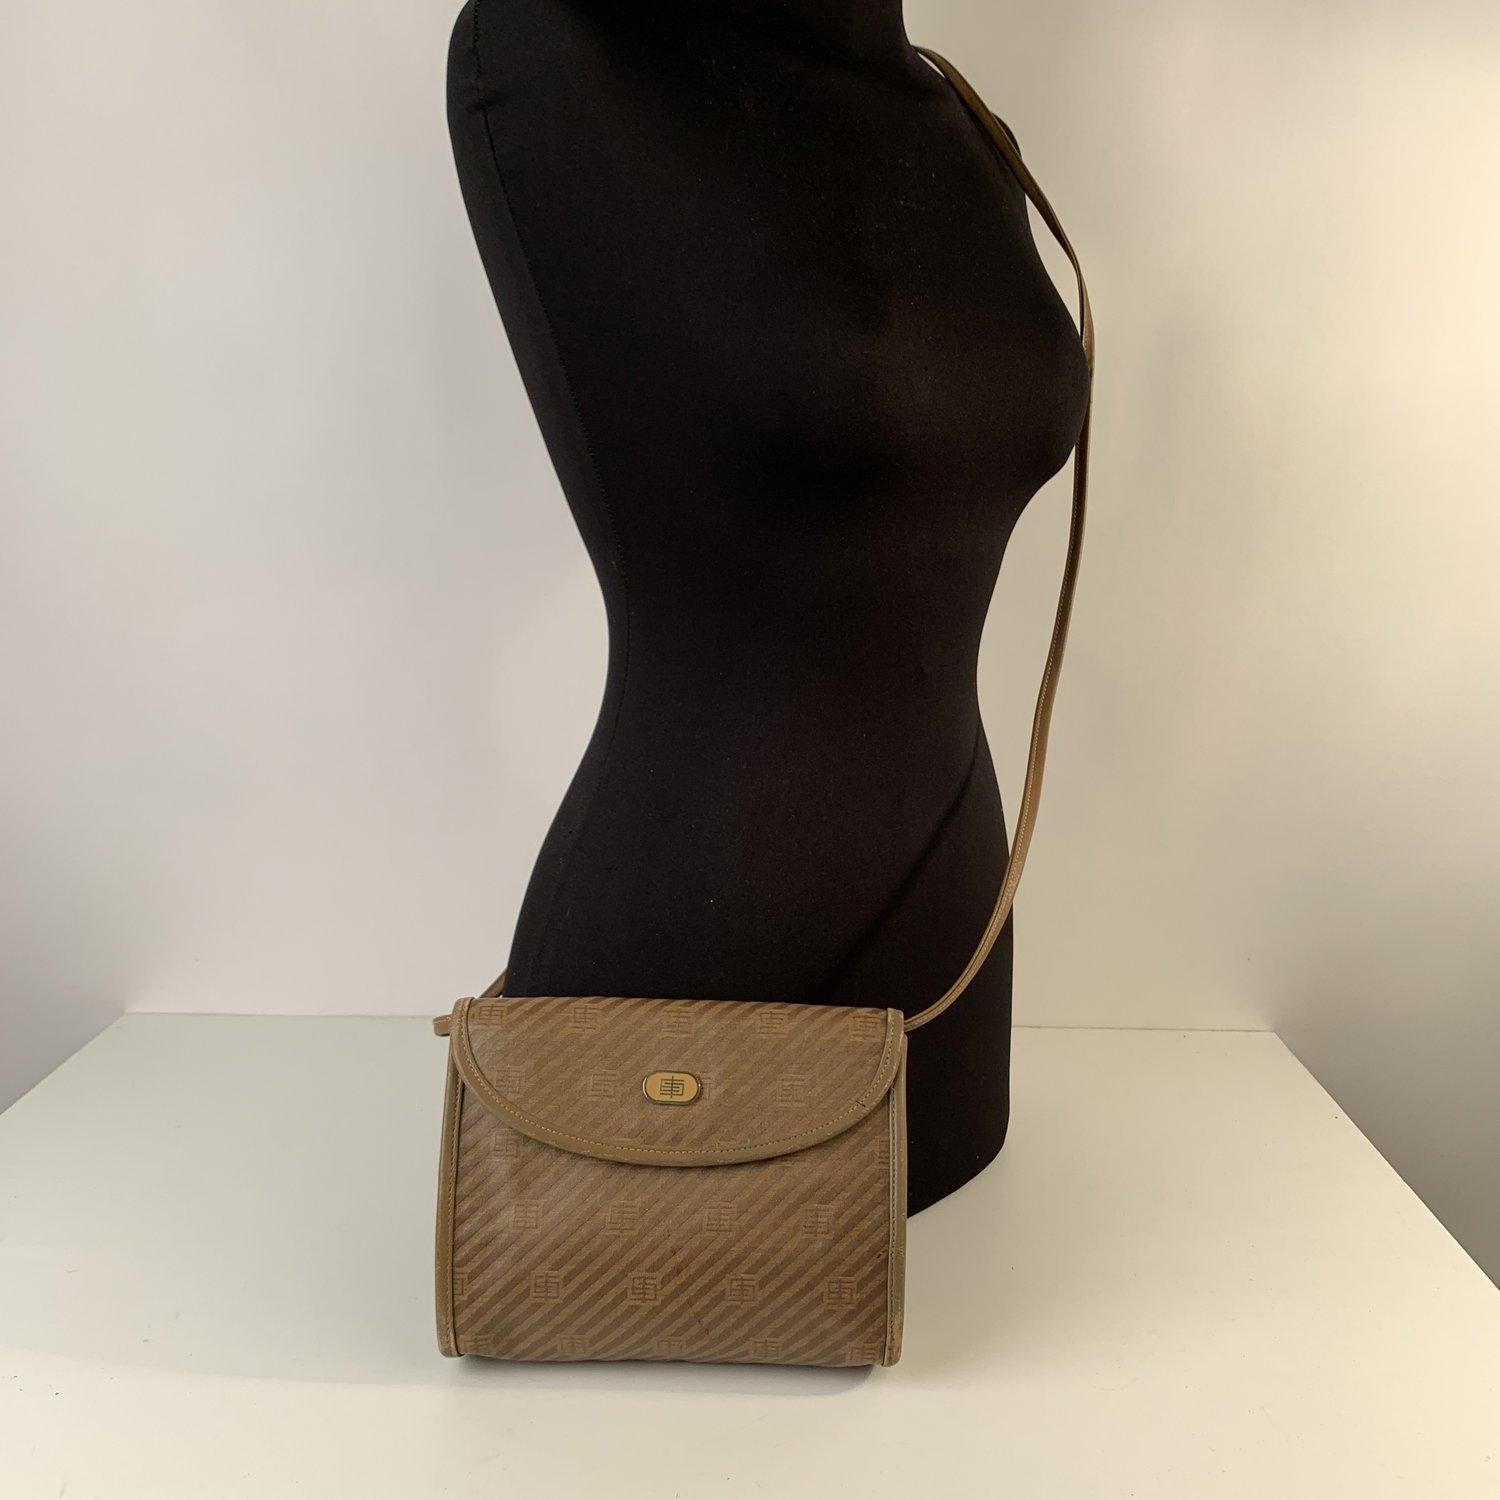 MATERIAL: Vinyl Canvas COLOR: Tan MODEL: Messenger Bag GENDER: Women SIZE: Small Condition Gently used. Some light wear of use - Some wear of use on leather trim (especially on bottom corners). A brown mark on canvas on the front. A couple of small